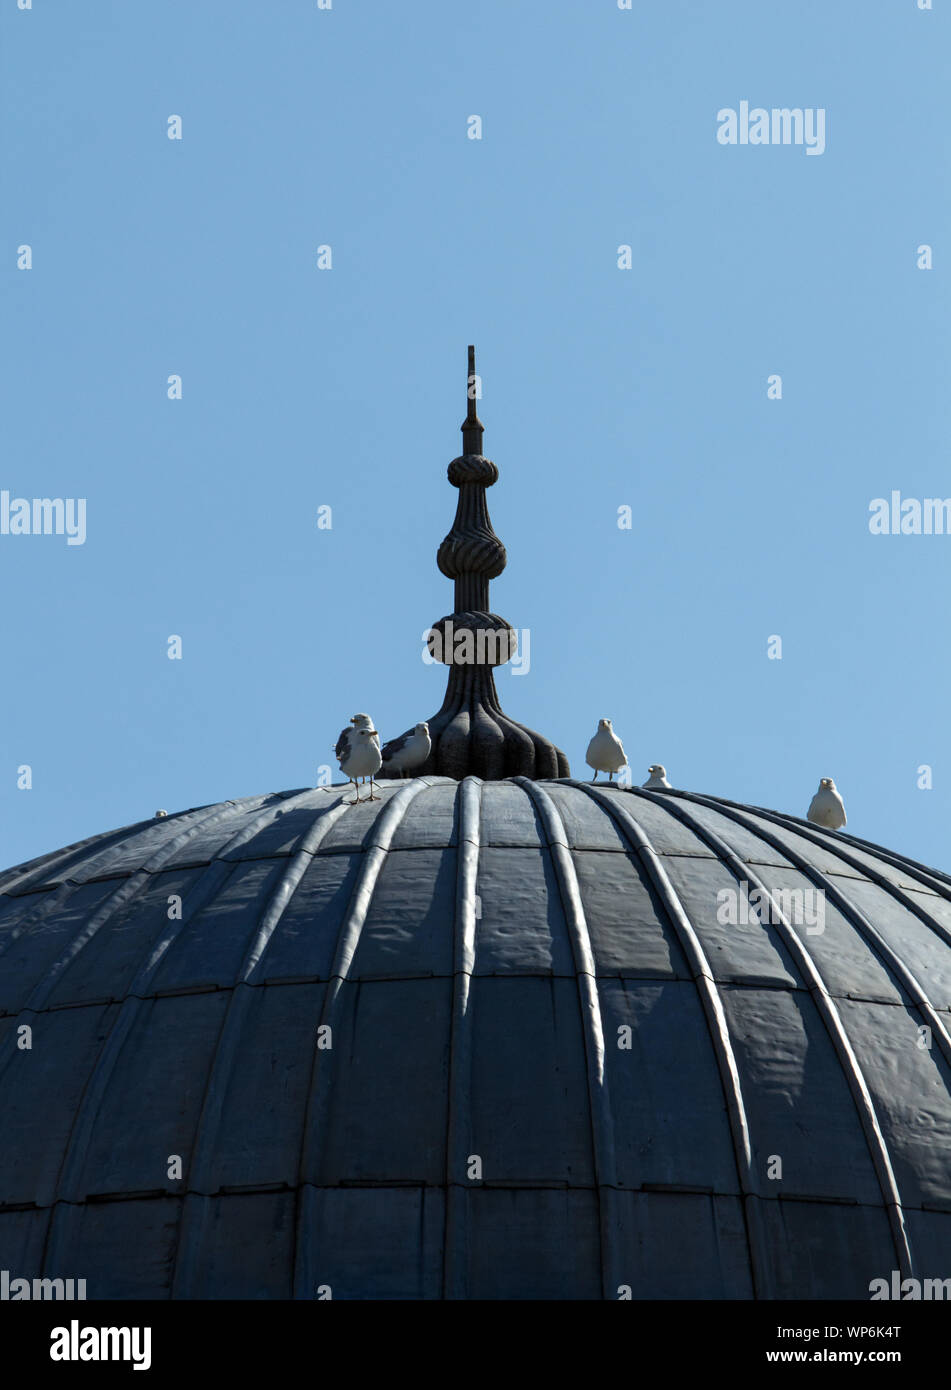 Low angle view of a group of seagulls lazily waiting at the dome of a medieval building at midday. Stock Photo